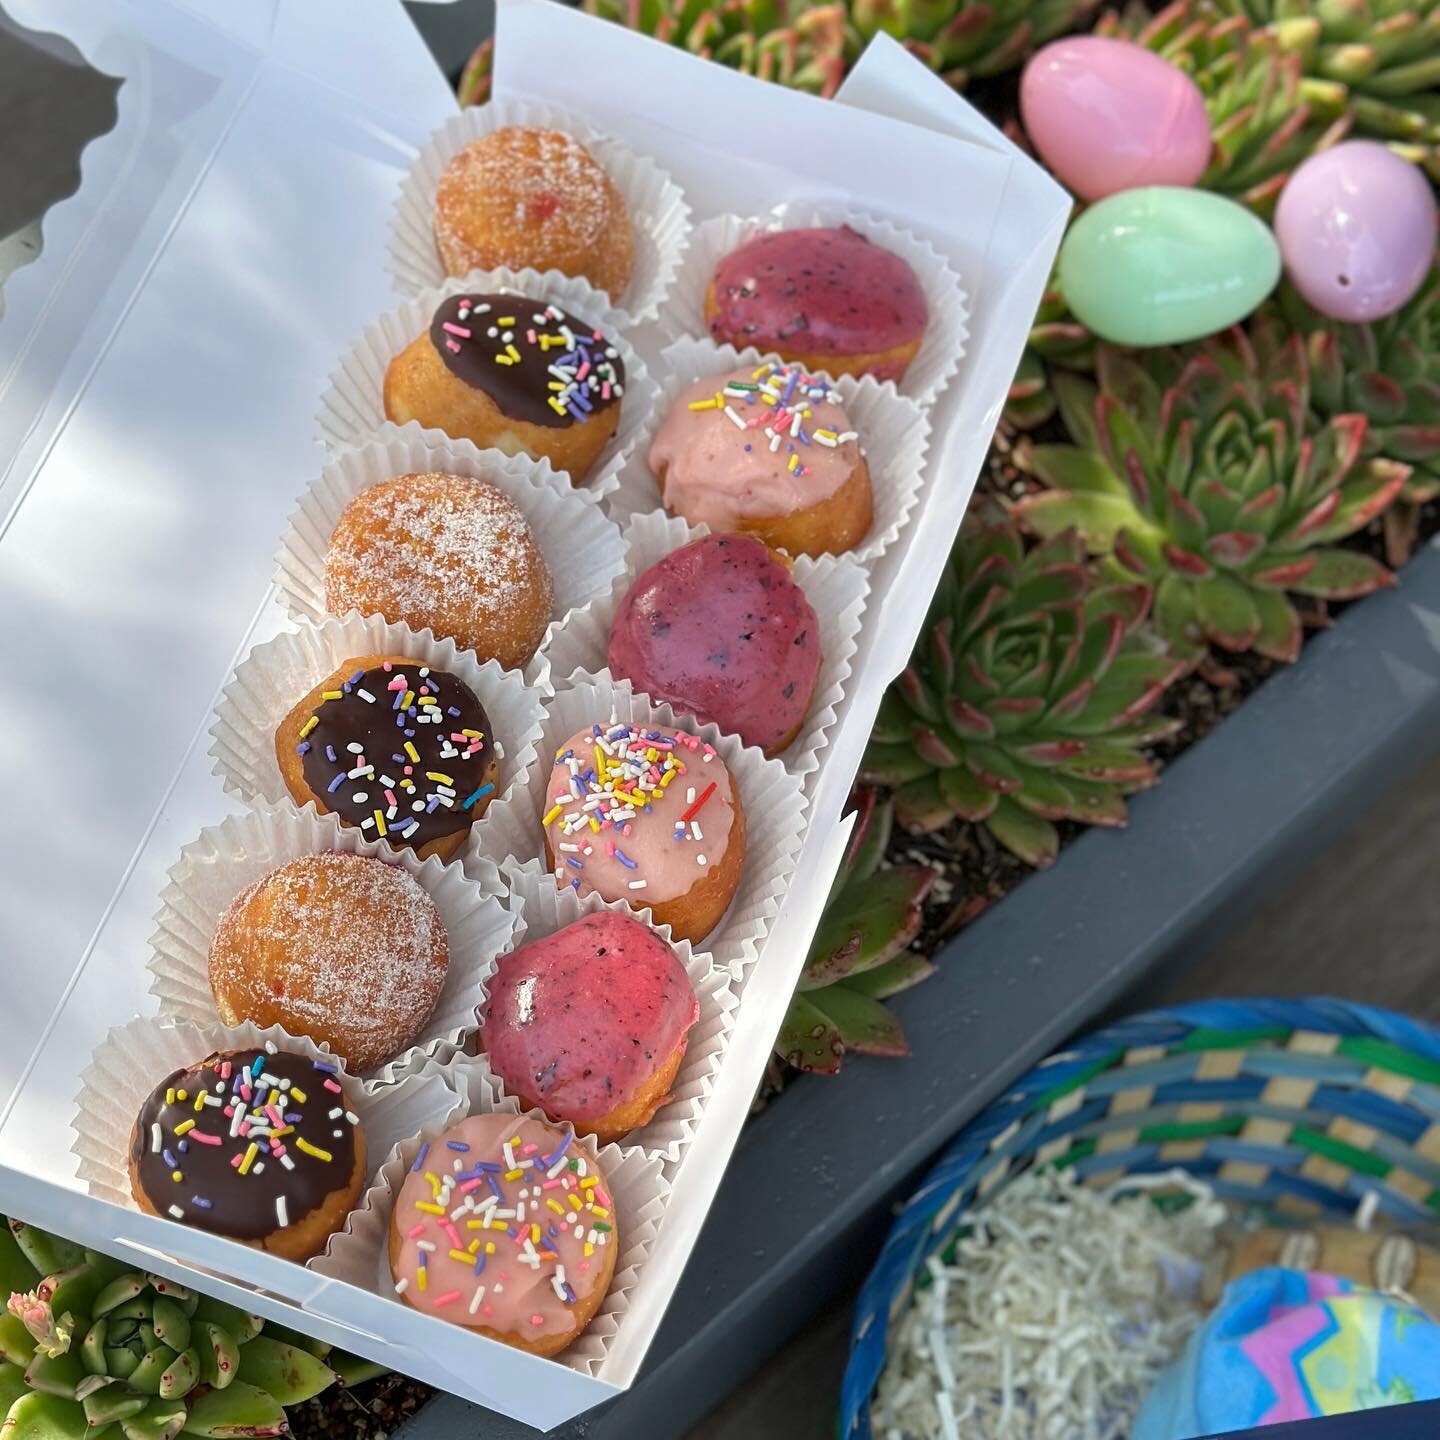 Donut let Easter go by without a little sweetness 🐇🐣✨

The Easter Egg doughnut hole box by @johnnydoughnuts was the perfect addition to our brunch spread 🙃 

#spring #easter #donutbox #donuts #bayareaeats #eats #bayarea #sfbayarea

✌️#freshlocalvi